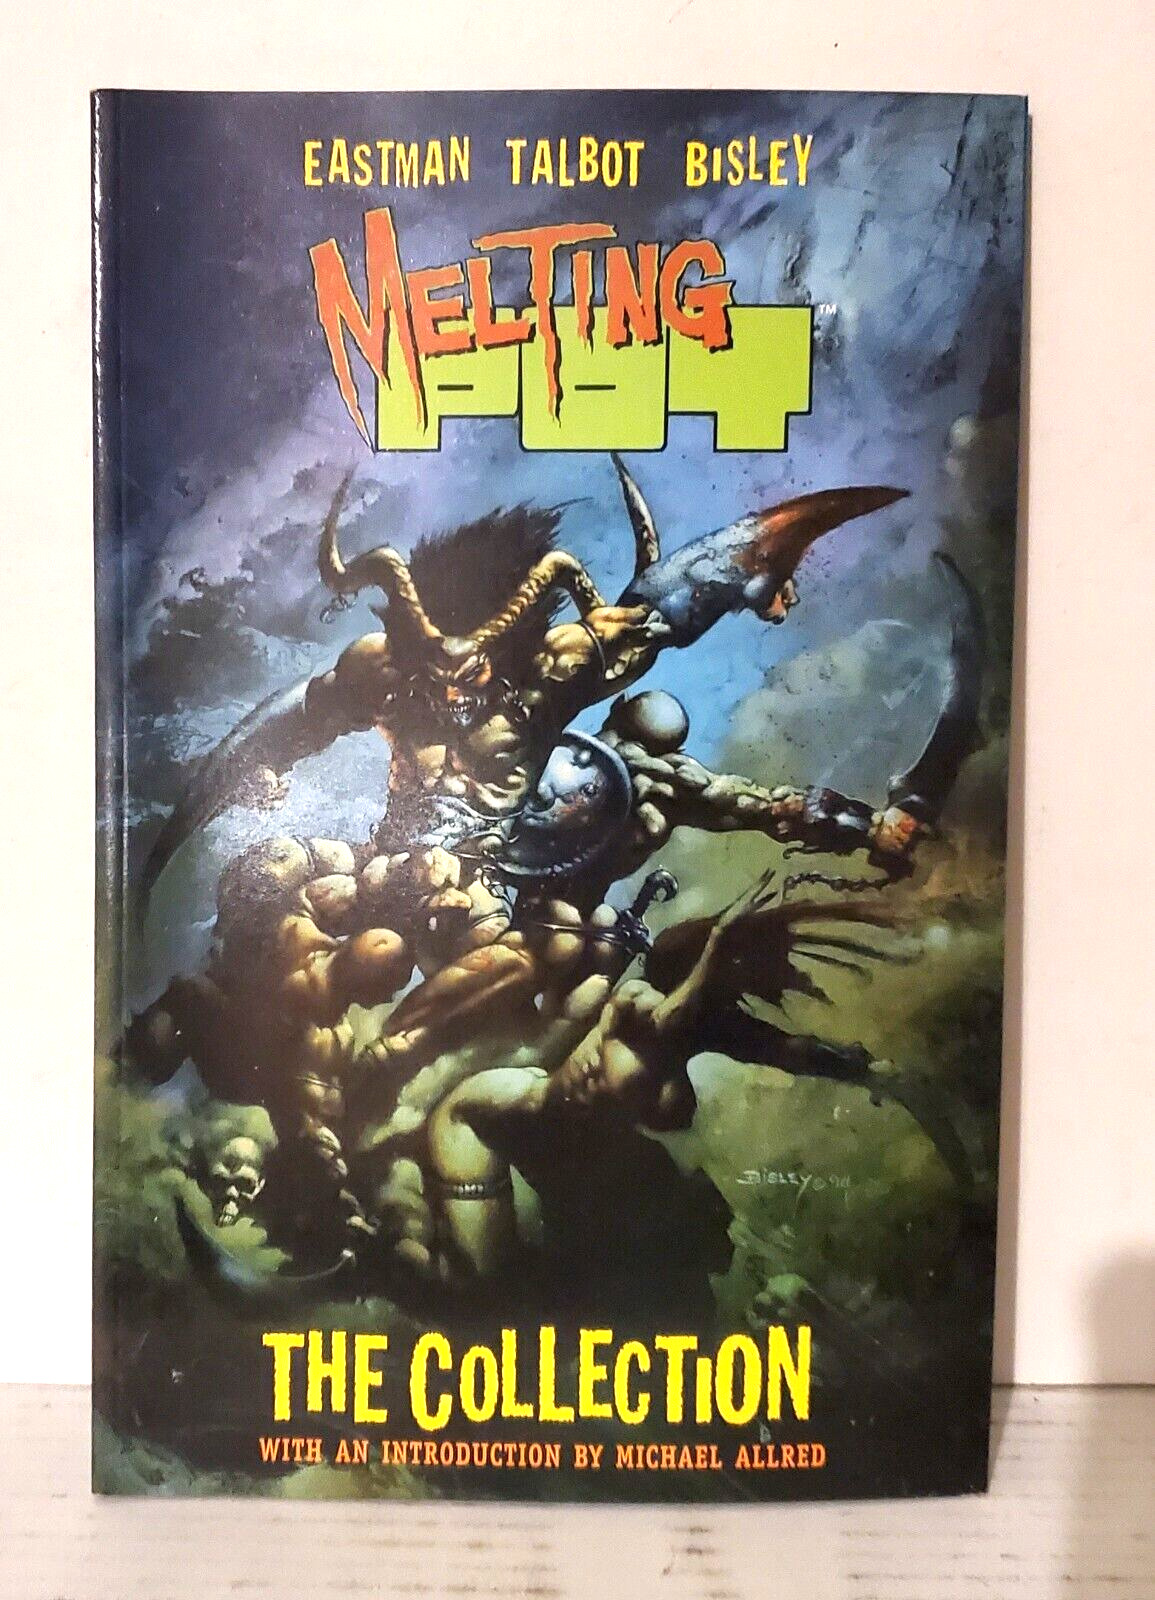 MELTING POT: THE COLLECTION, Eastman, Trade Paperback, Comics